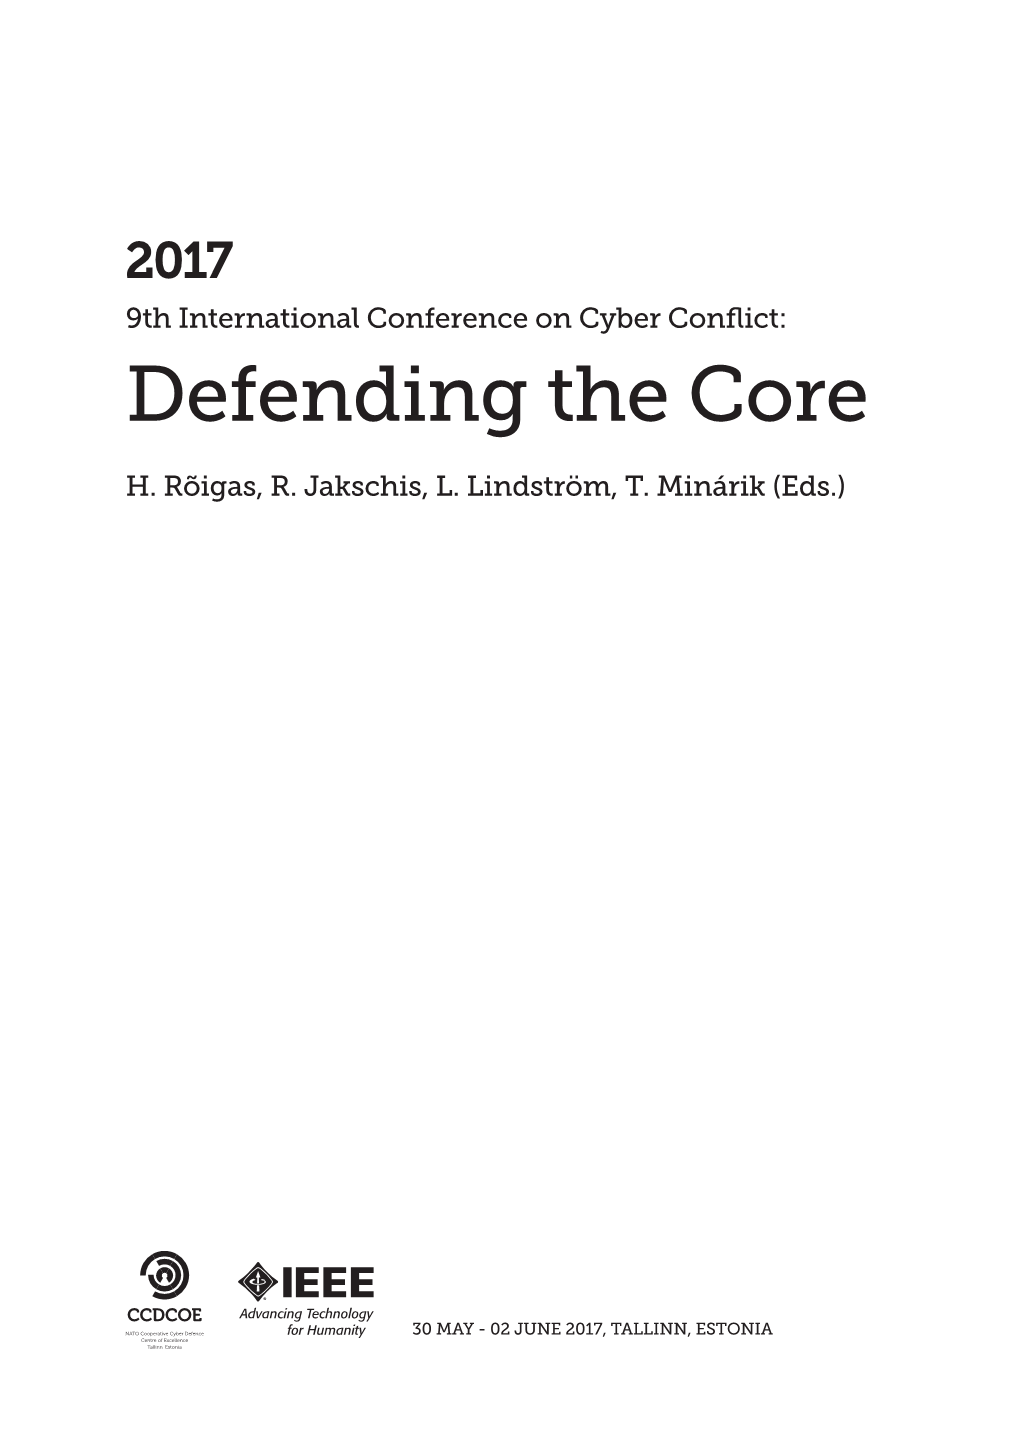 2017 9Th International Conference on Cyber Conflict: Defending the Core